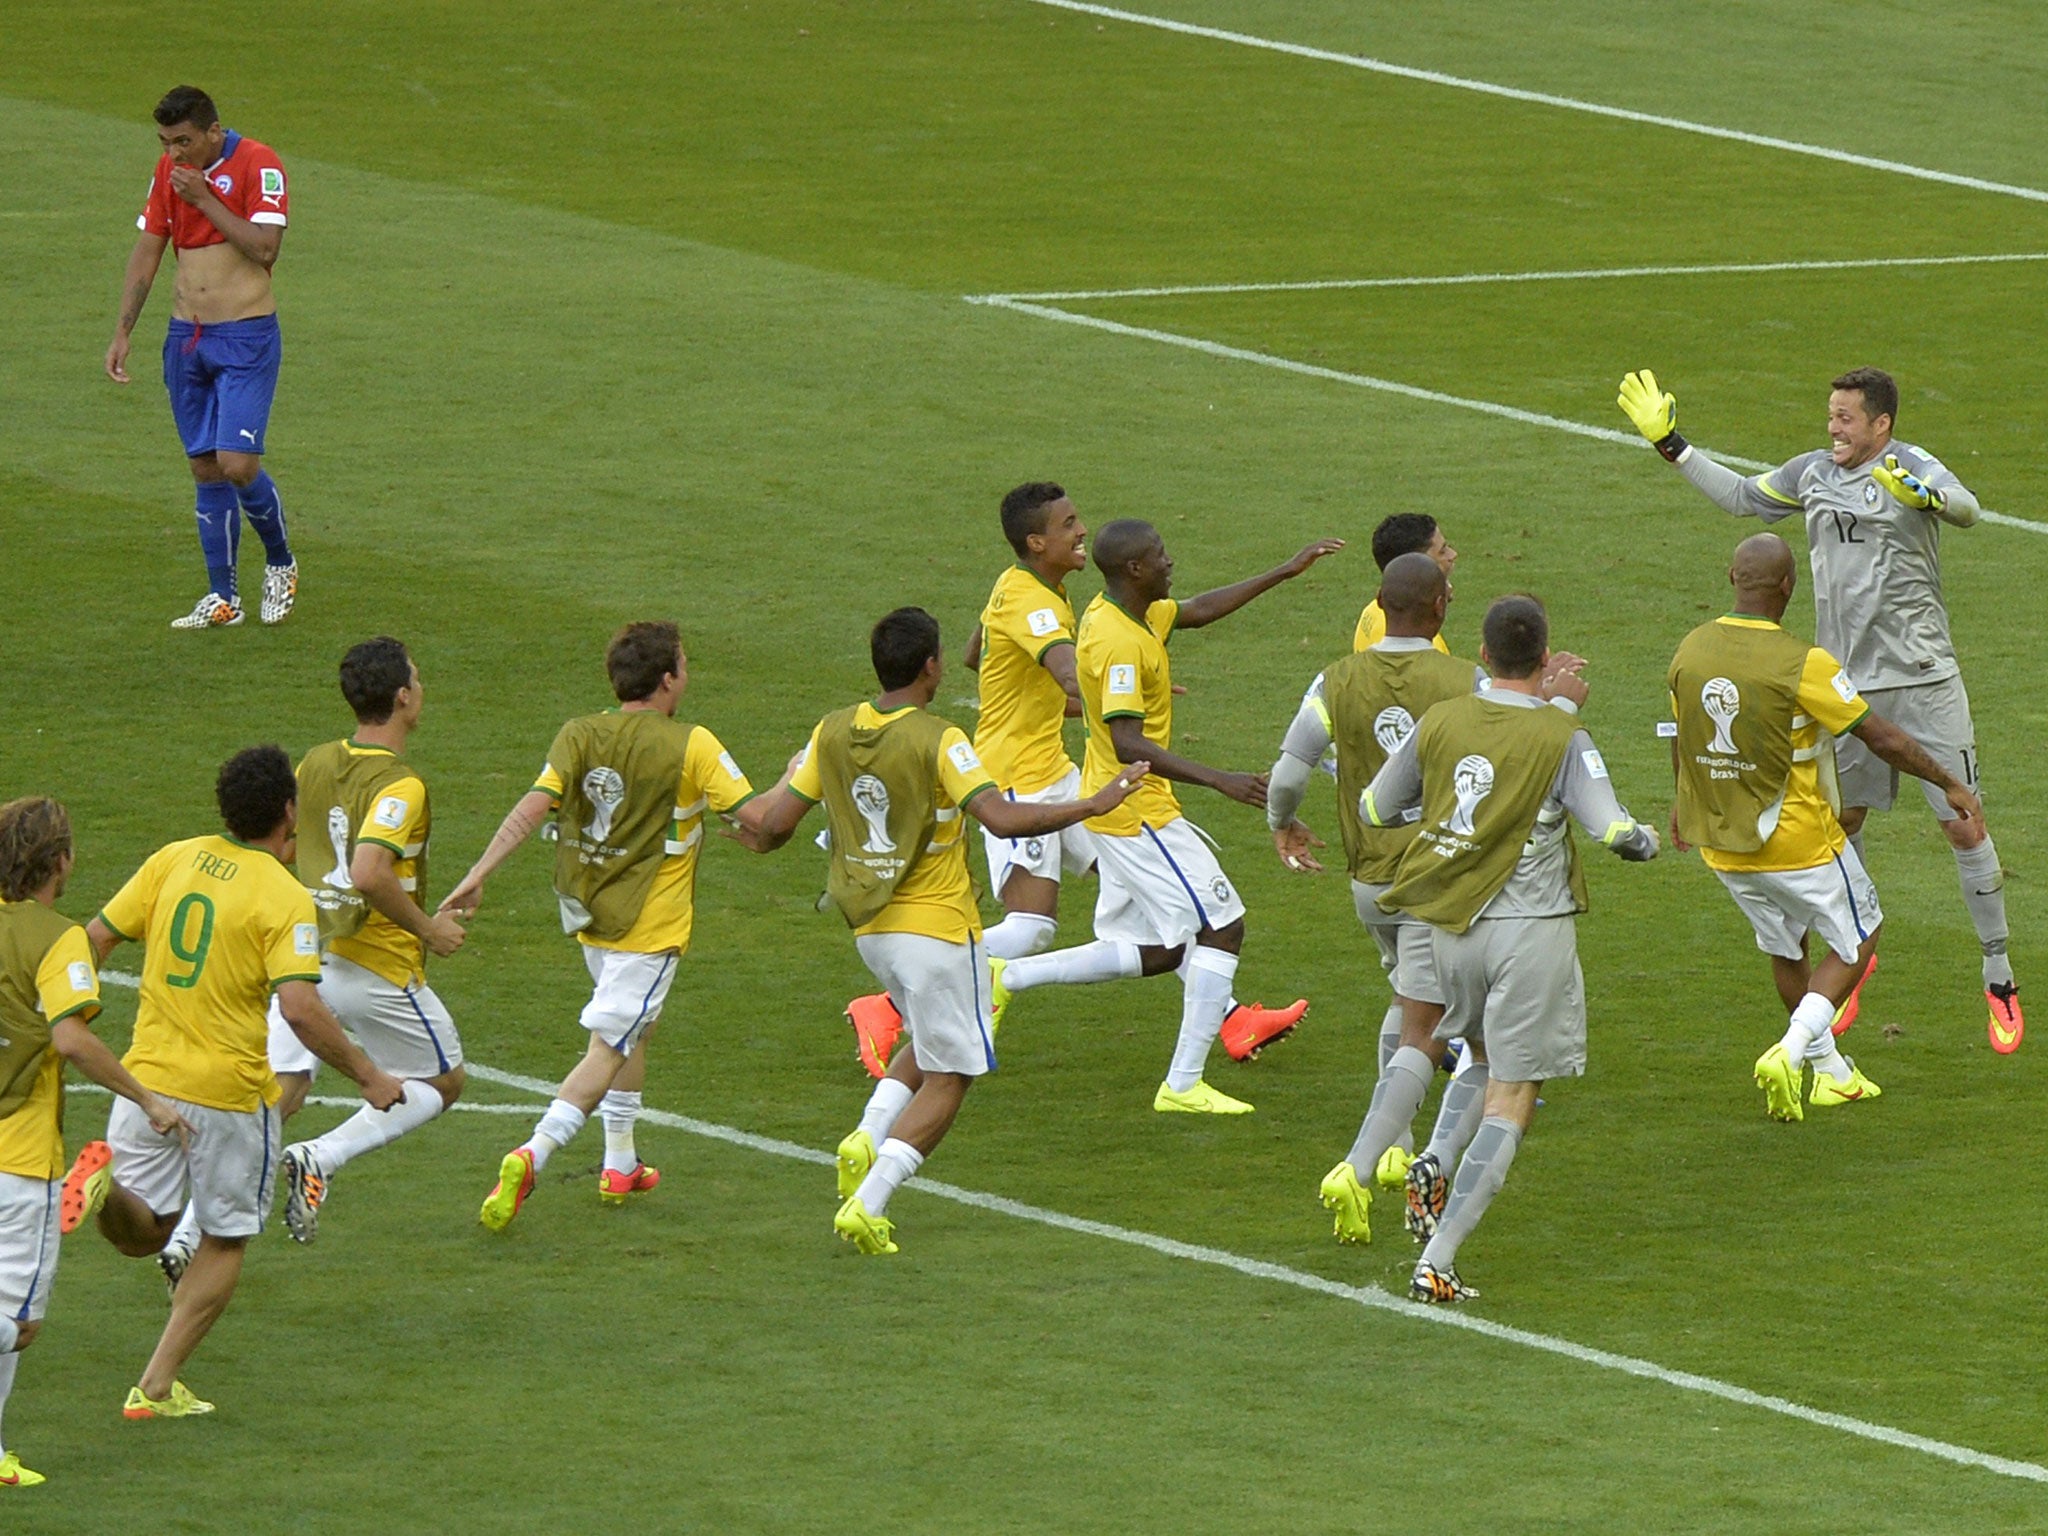 Players rush to celebrate with the hero after Gonzalo Jara hits the post